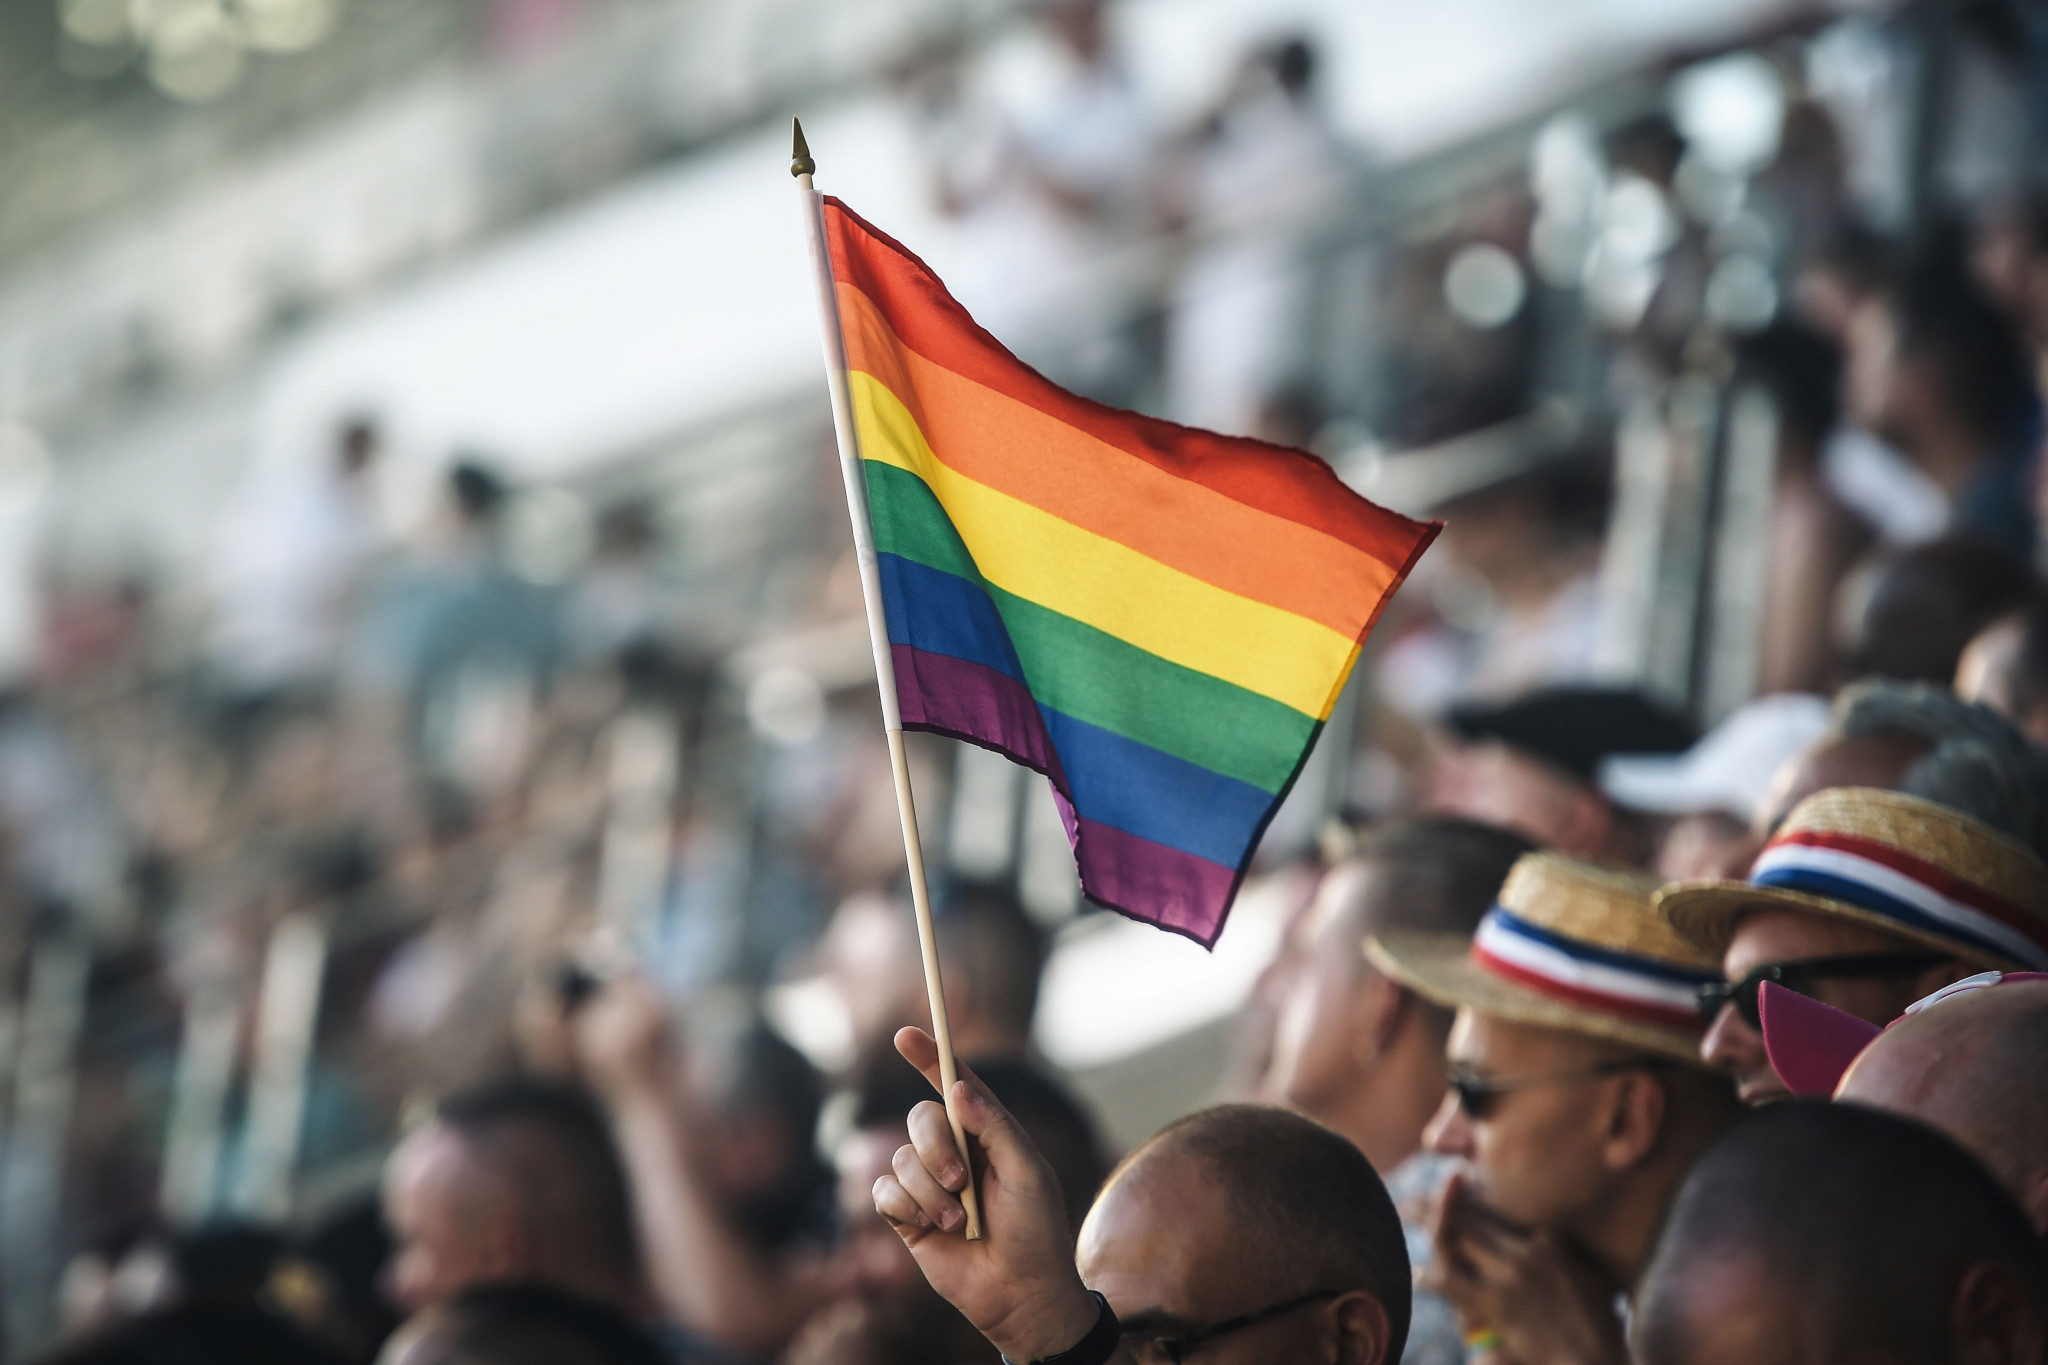 RFI Asia appointed marketing and public relations partner for 11th Gay Games